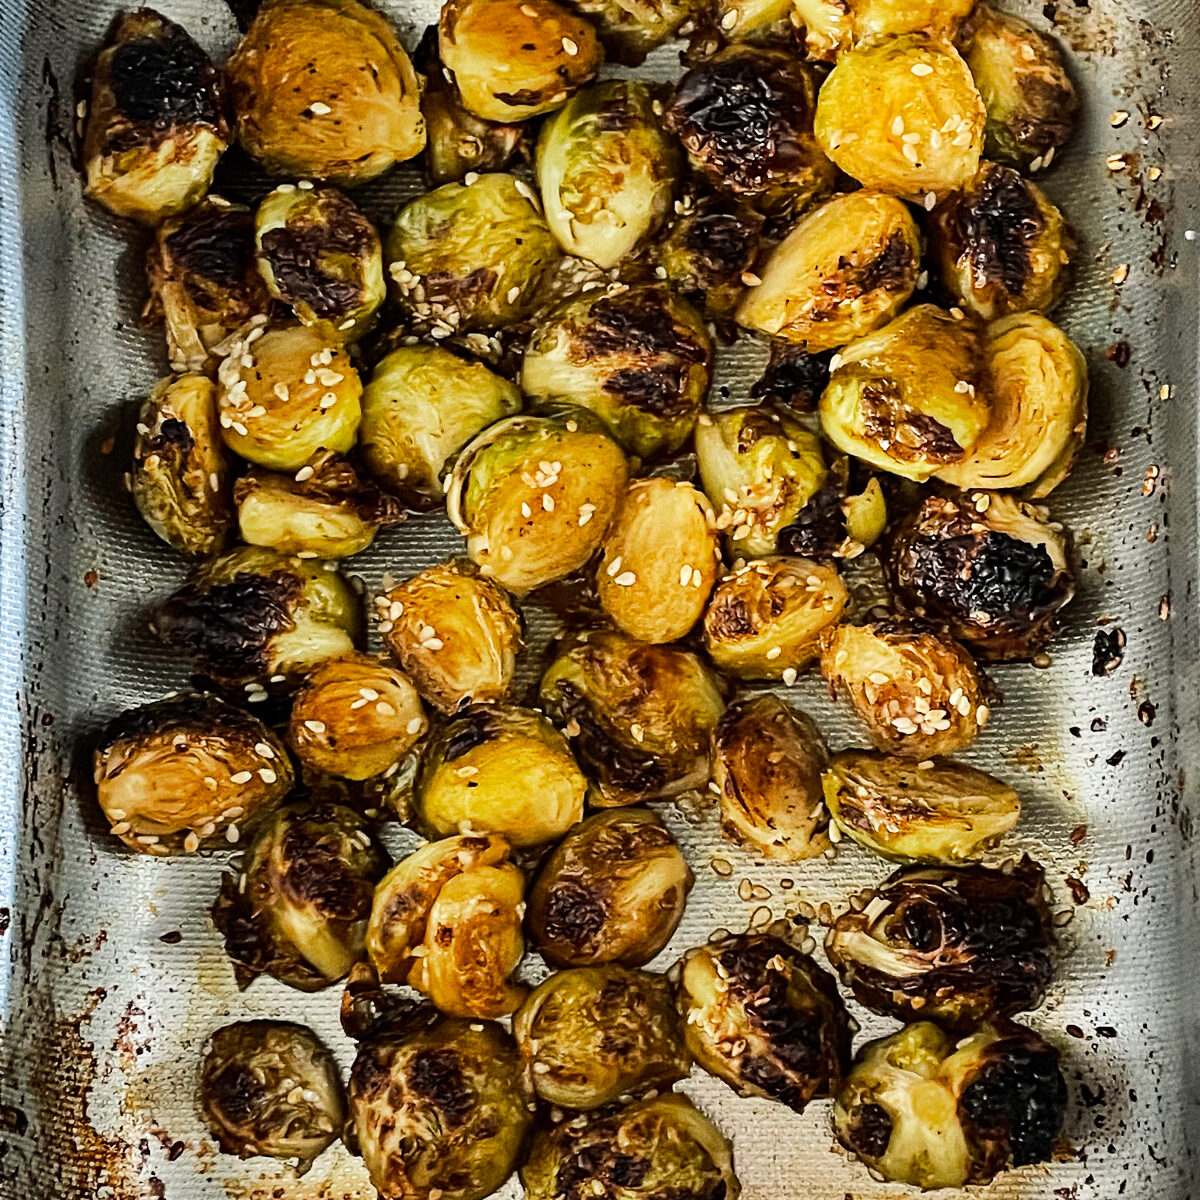 The halved brussel sprouts are roasted and crispy with dark brown spots and sesame seeds throughout.